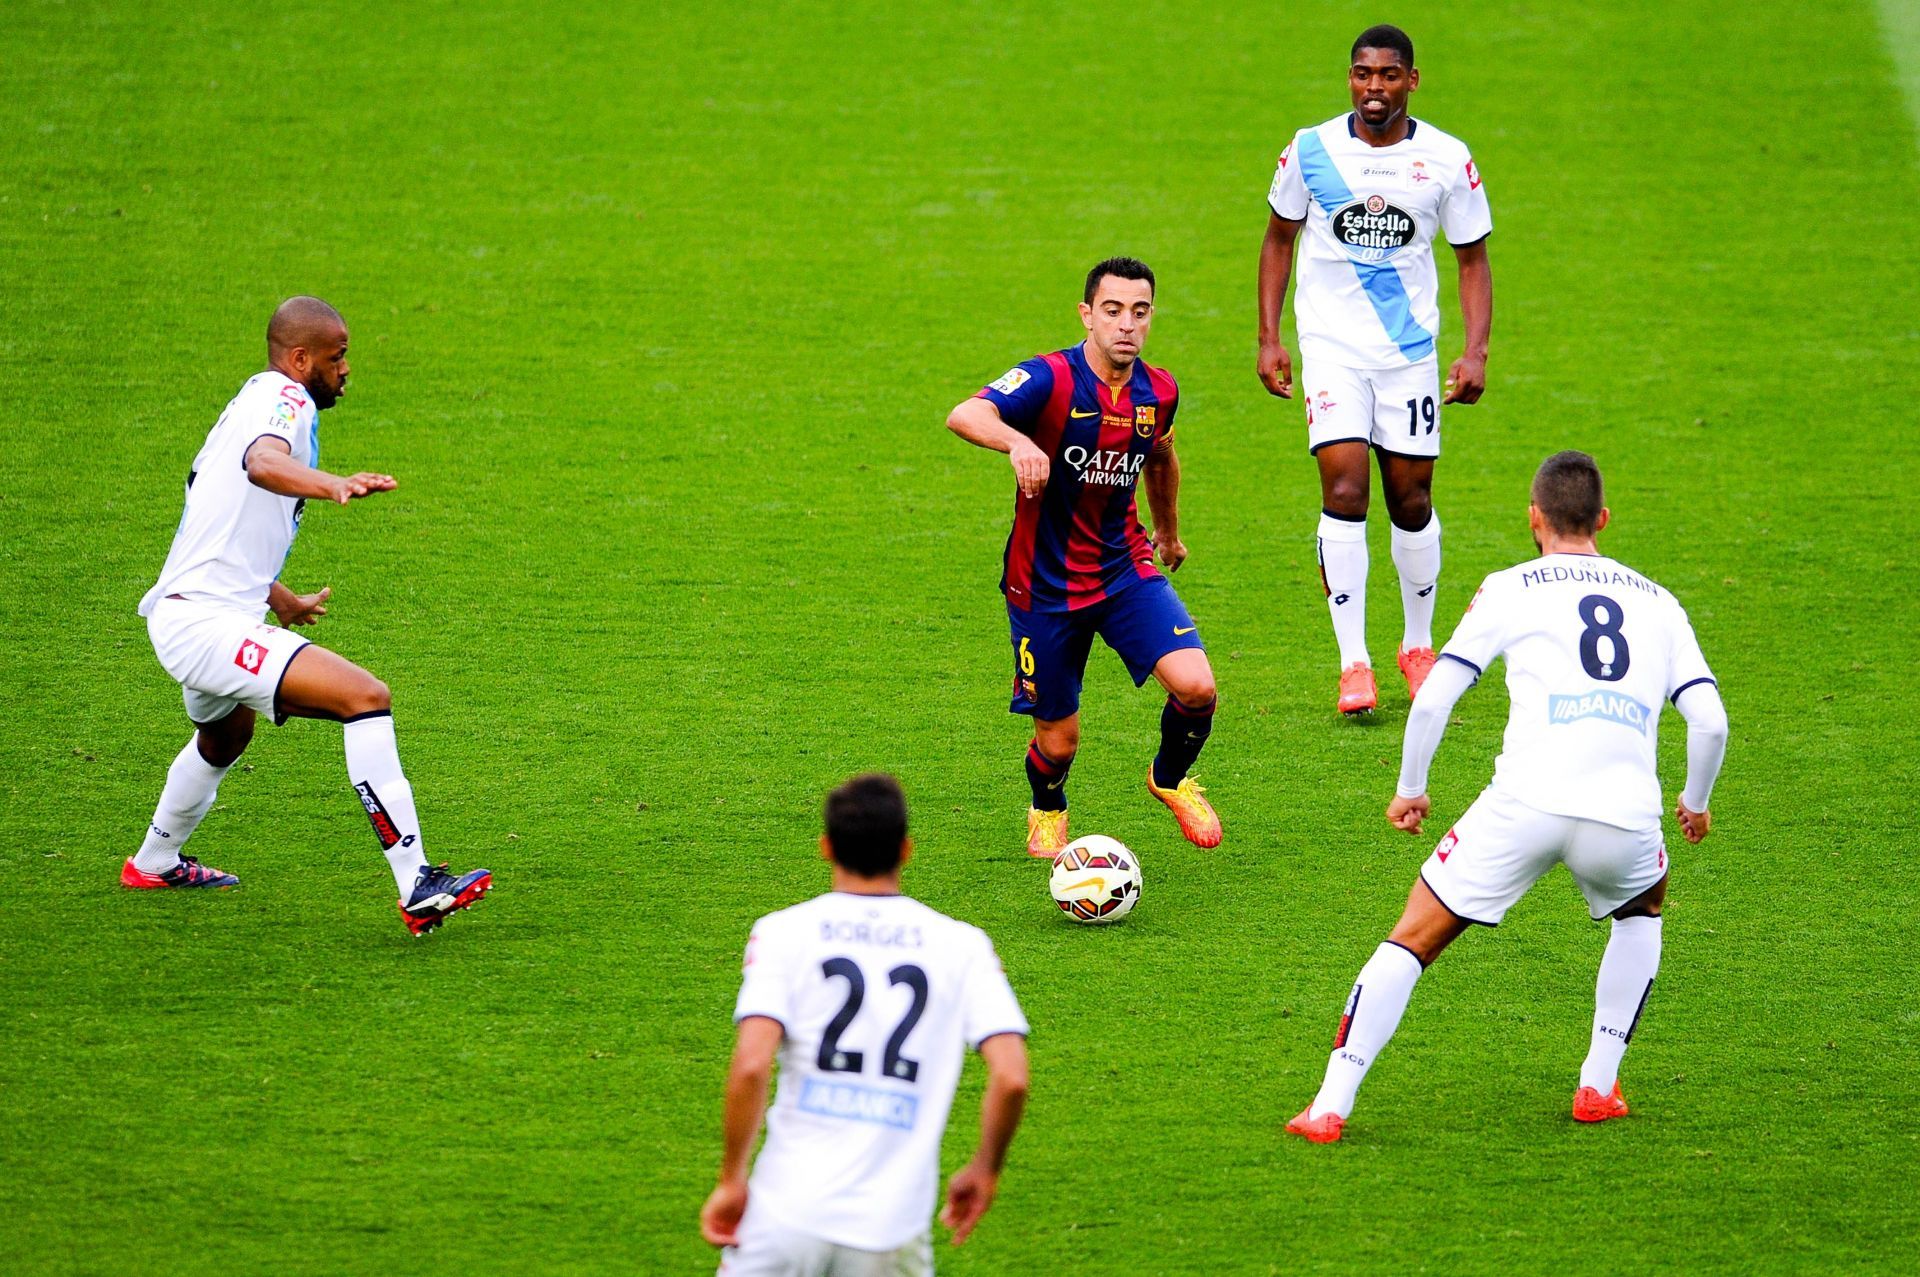 Former Barcelona player Xavi in action for the club